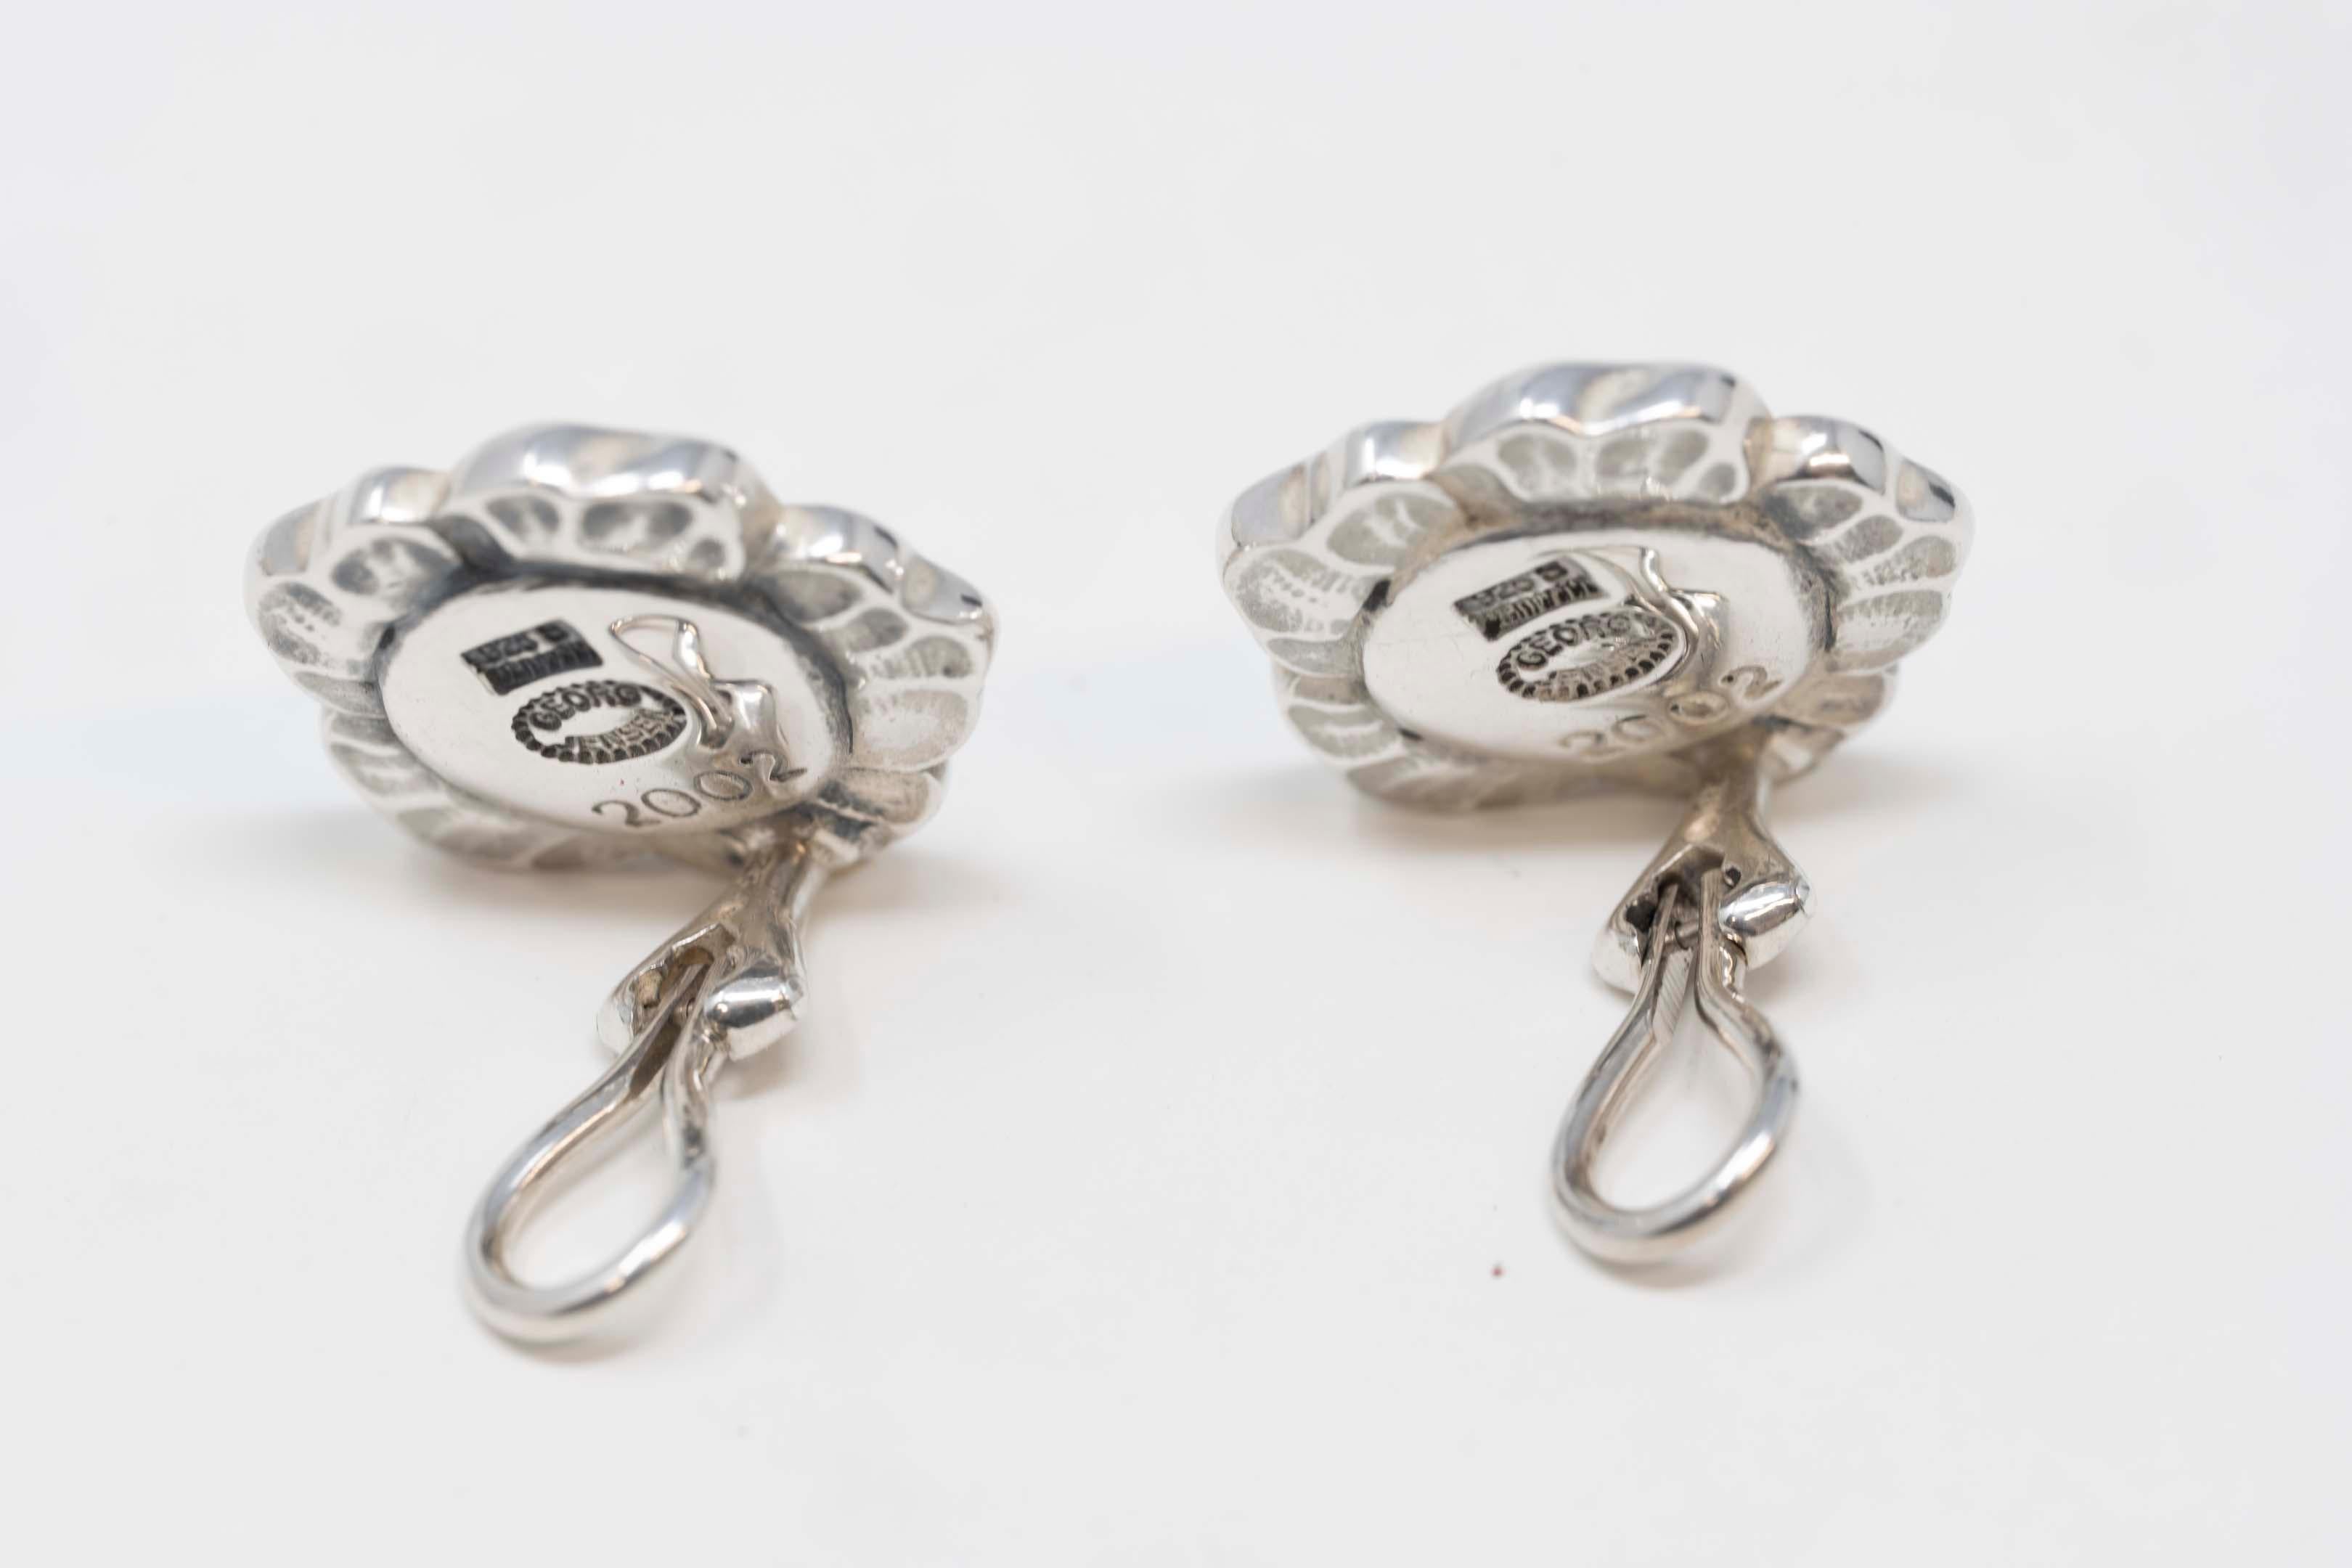 Georg Jensen Denmark 925 silver earring set numbered 2002. Stamped on the back, flower design with omega clip on. 14mm diameter, 20th century Denmark. In good condition.
